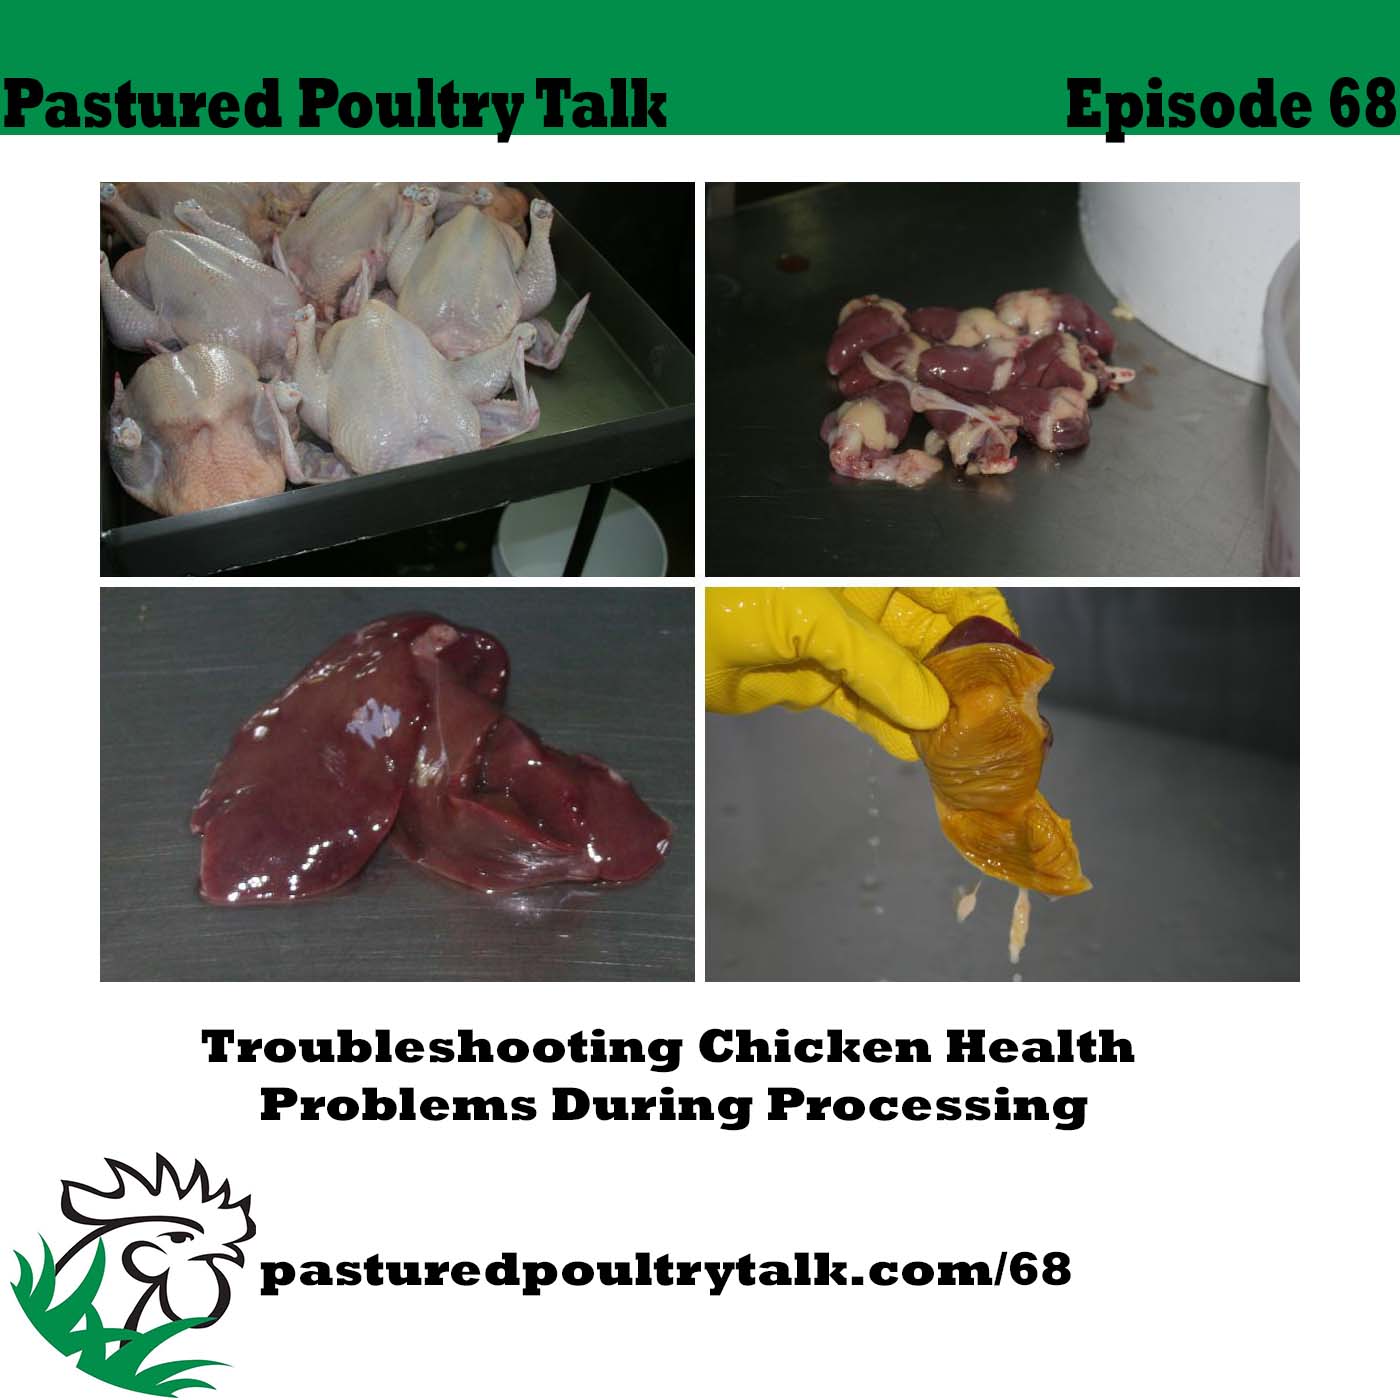 episode art for Pastured Poultry Episode 68 - troubleshooting chicken health problems.